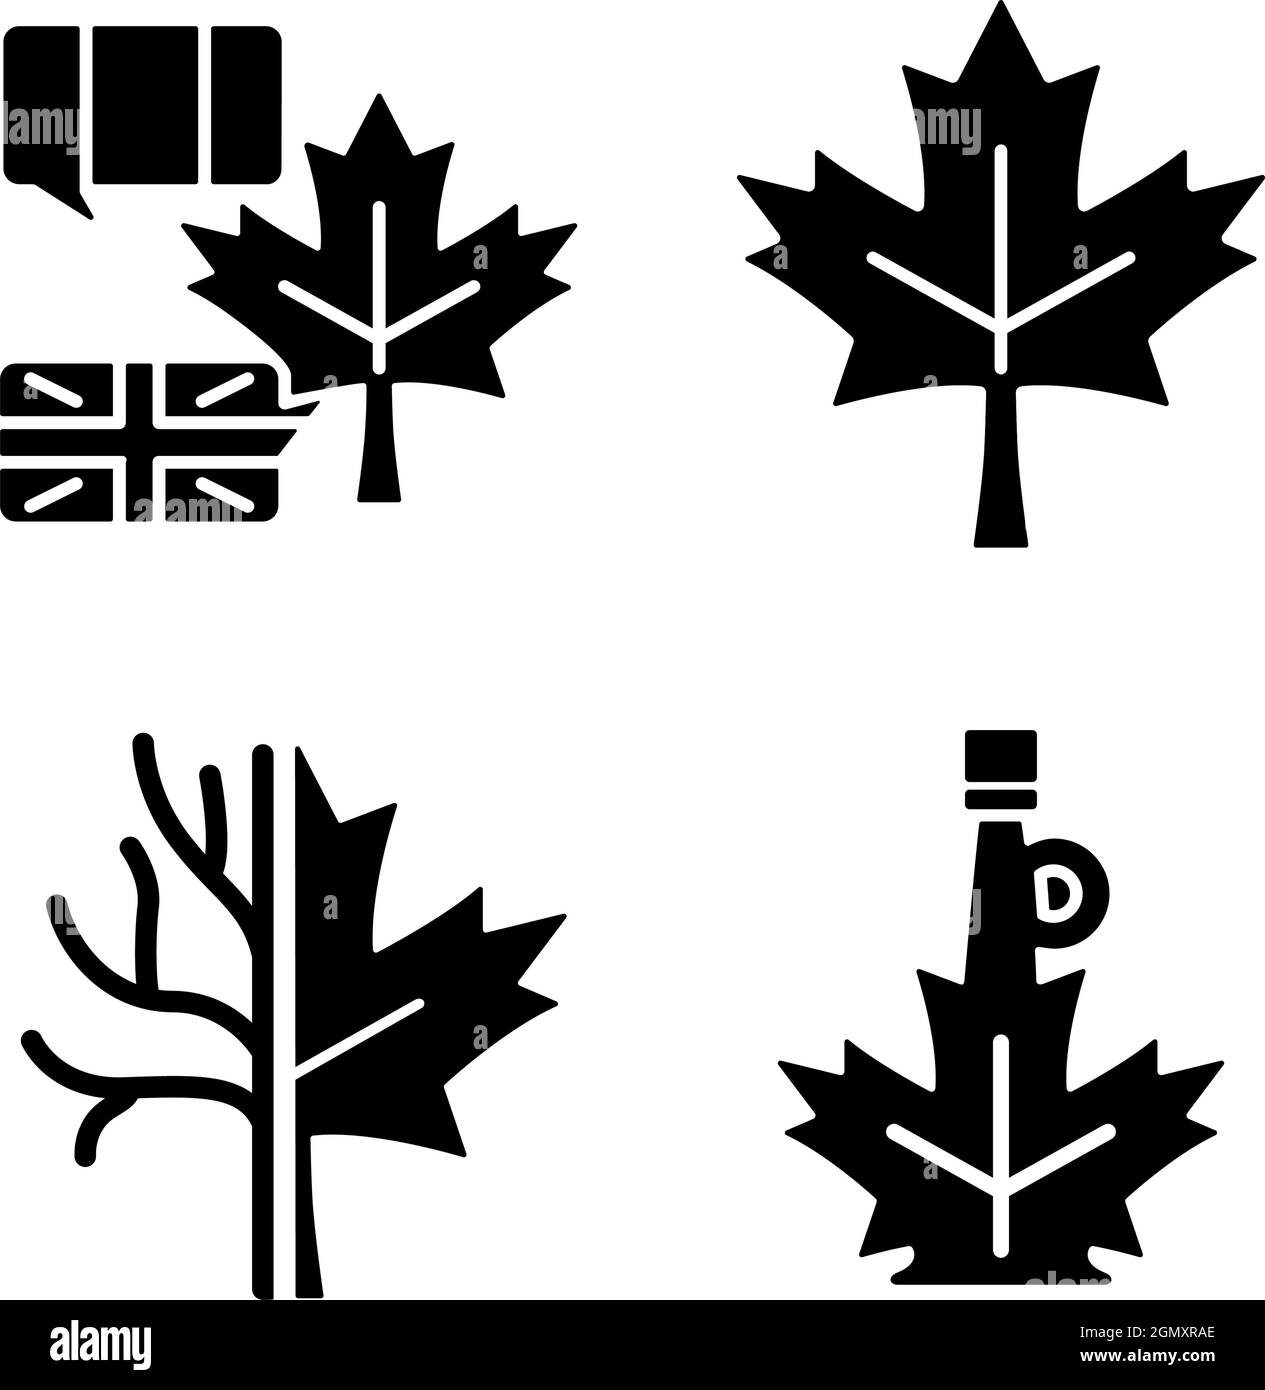 Maple leaf significance black glyph icons set on white space Stock Vector